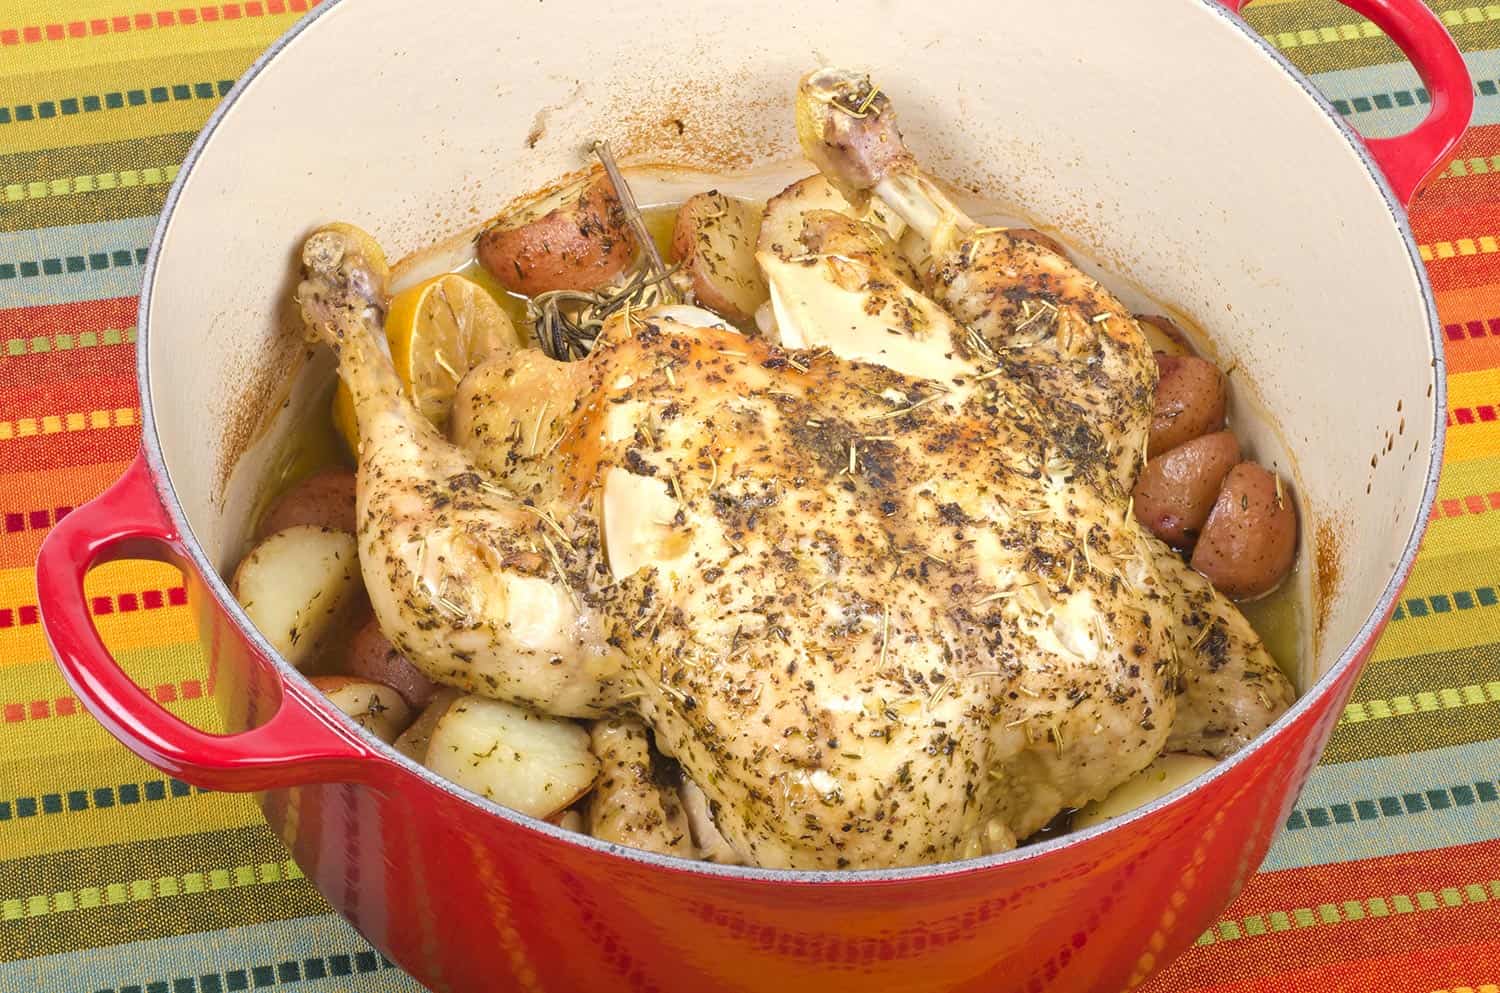 Dutch Oven with roasted chicken, dried herbs and garlic